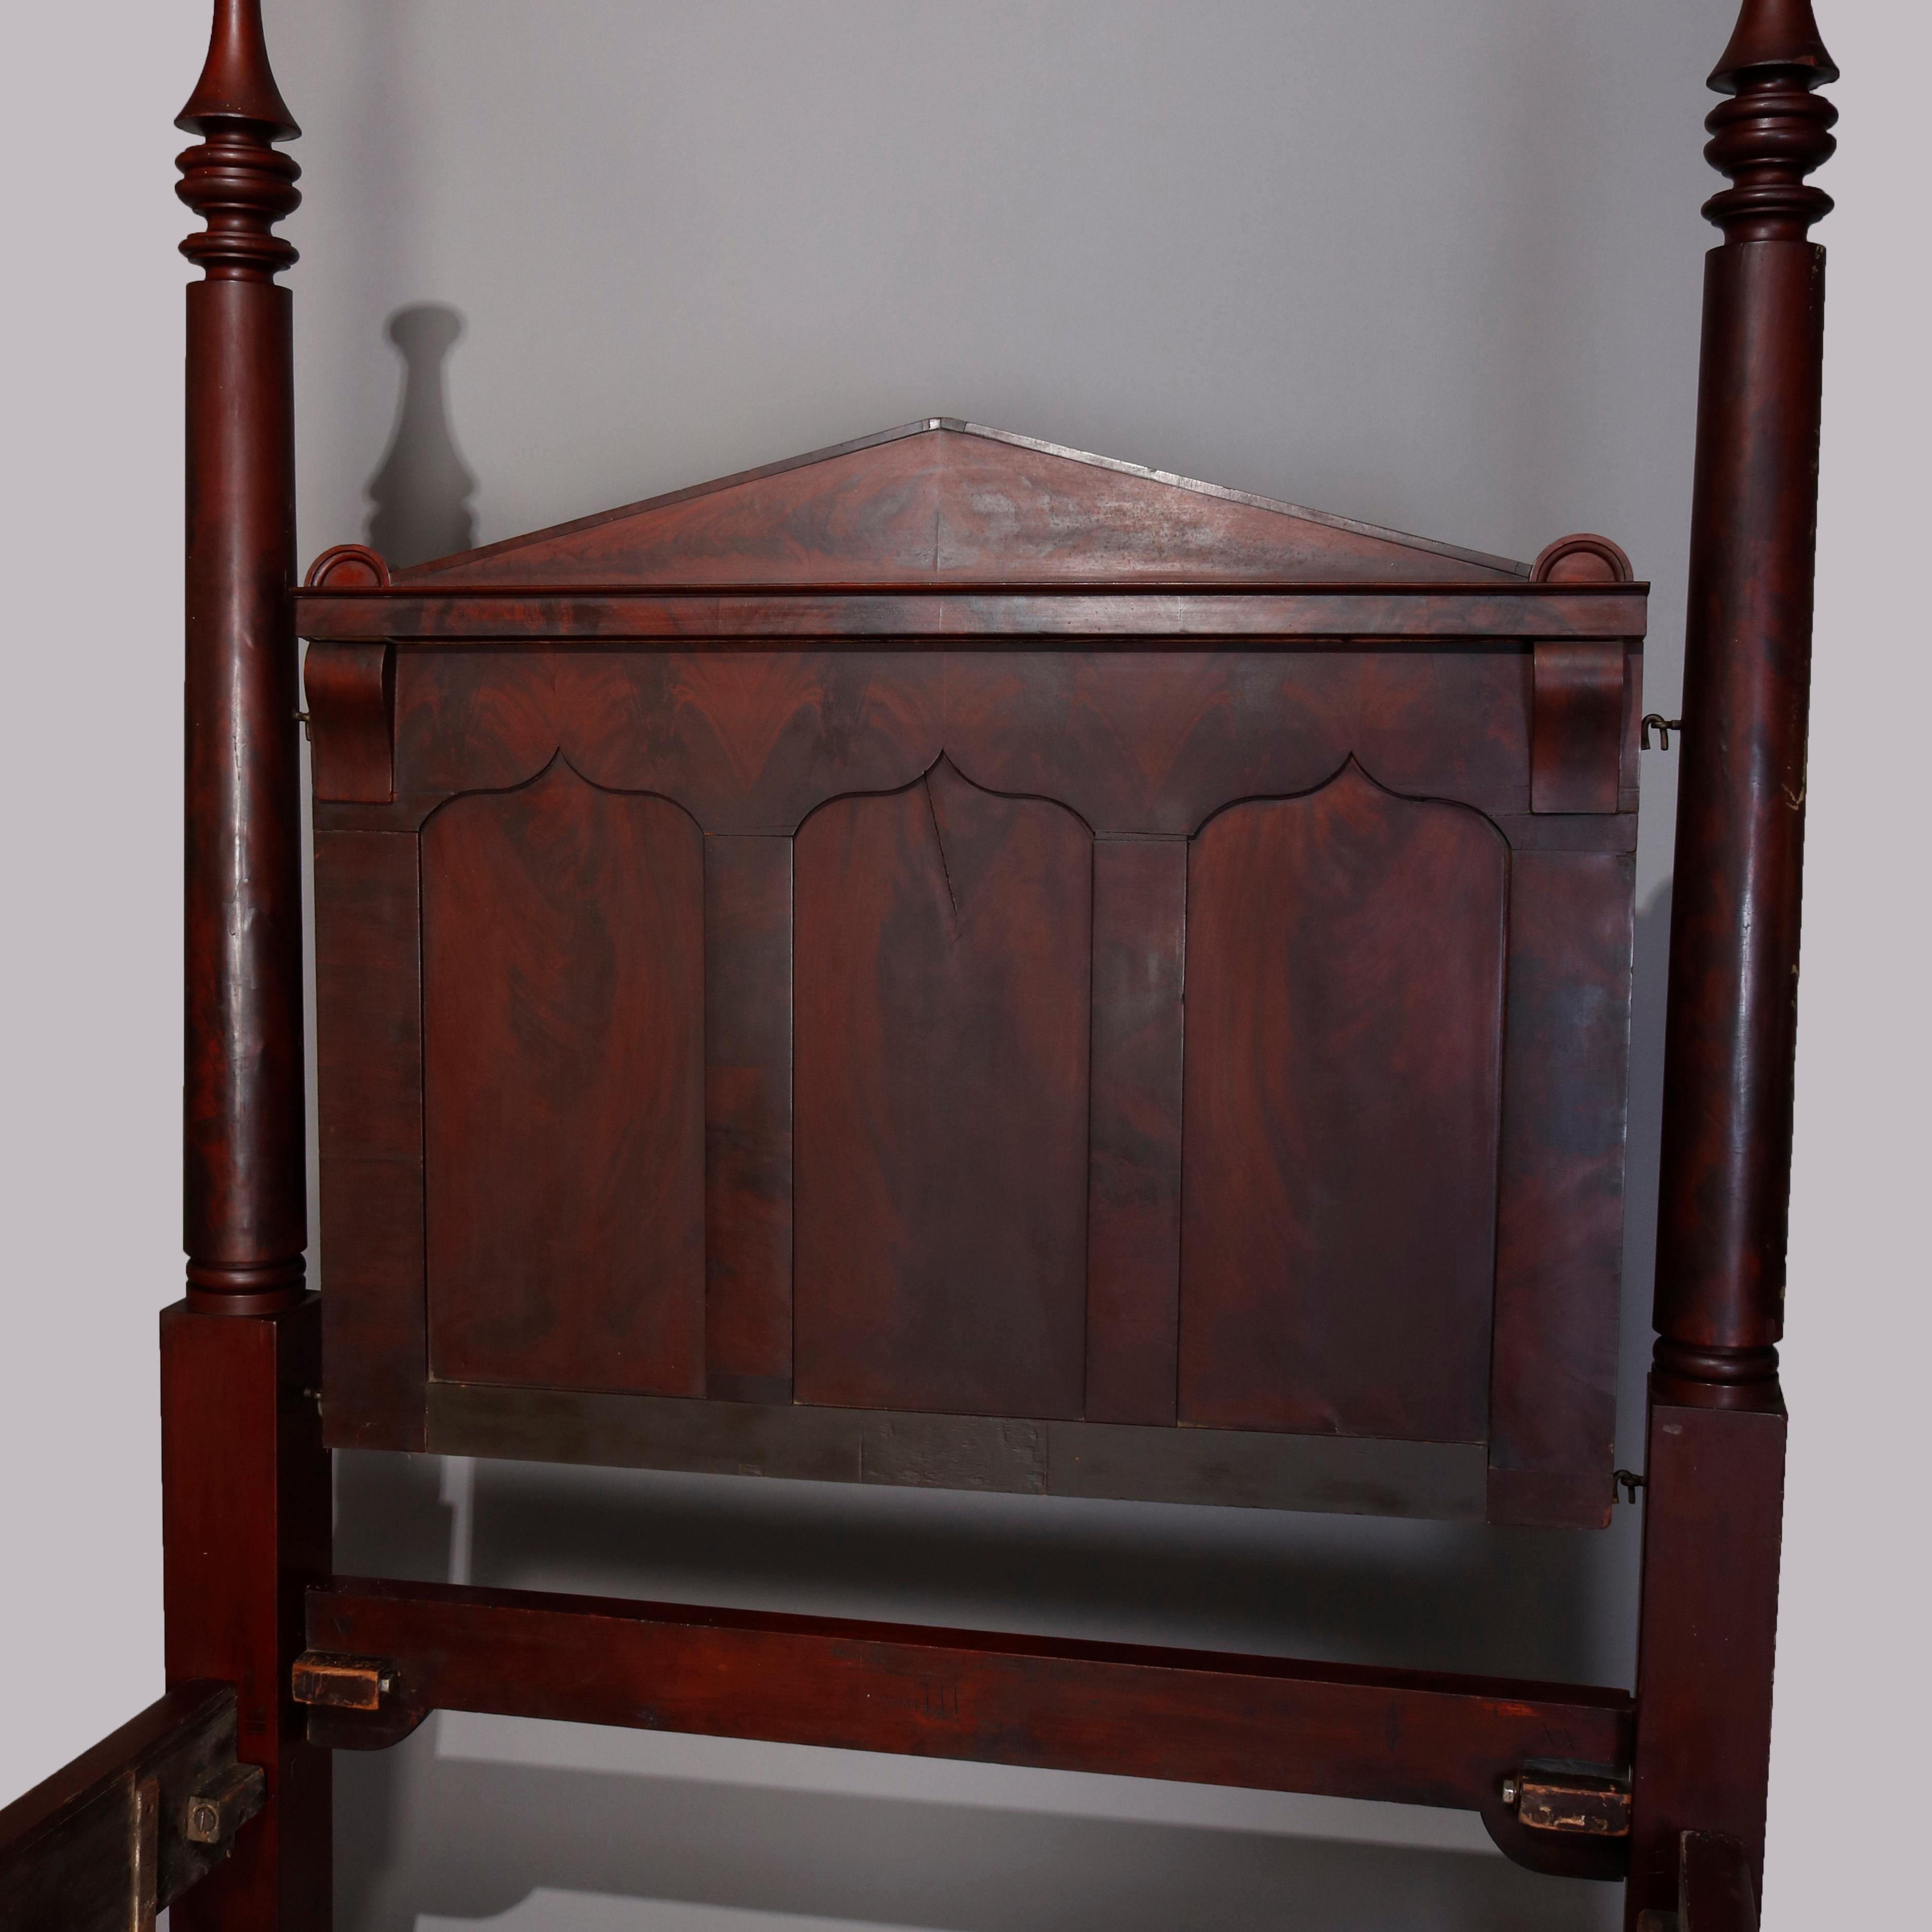 Carved American Empire Flame Mahogany Quervelle School Tester Bed, circa 1840